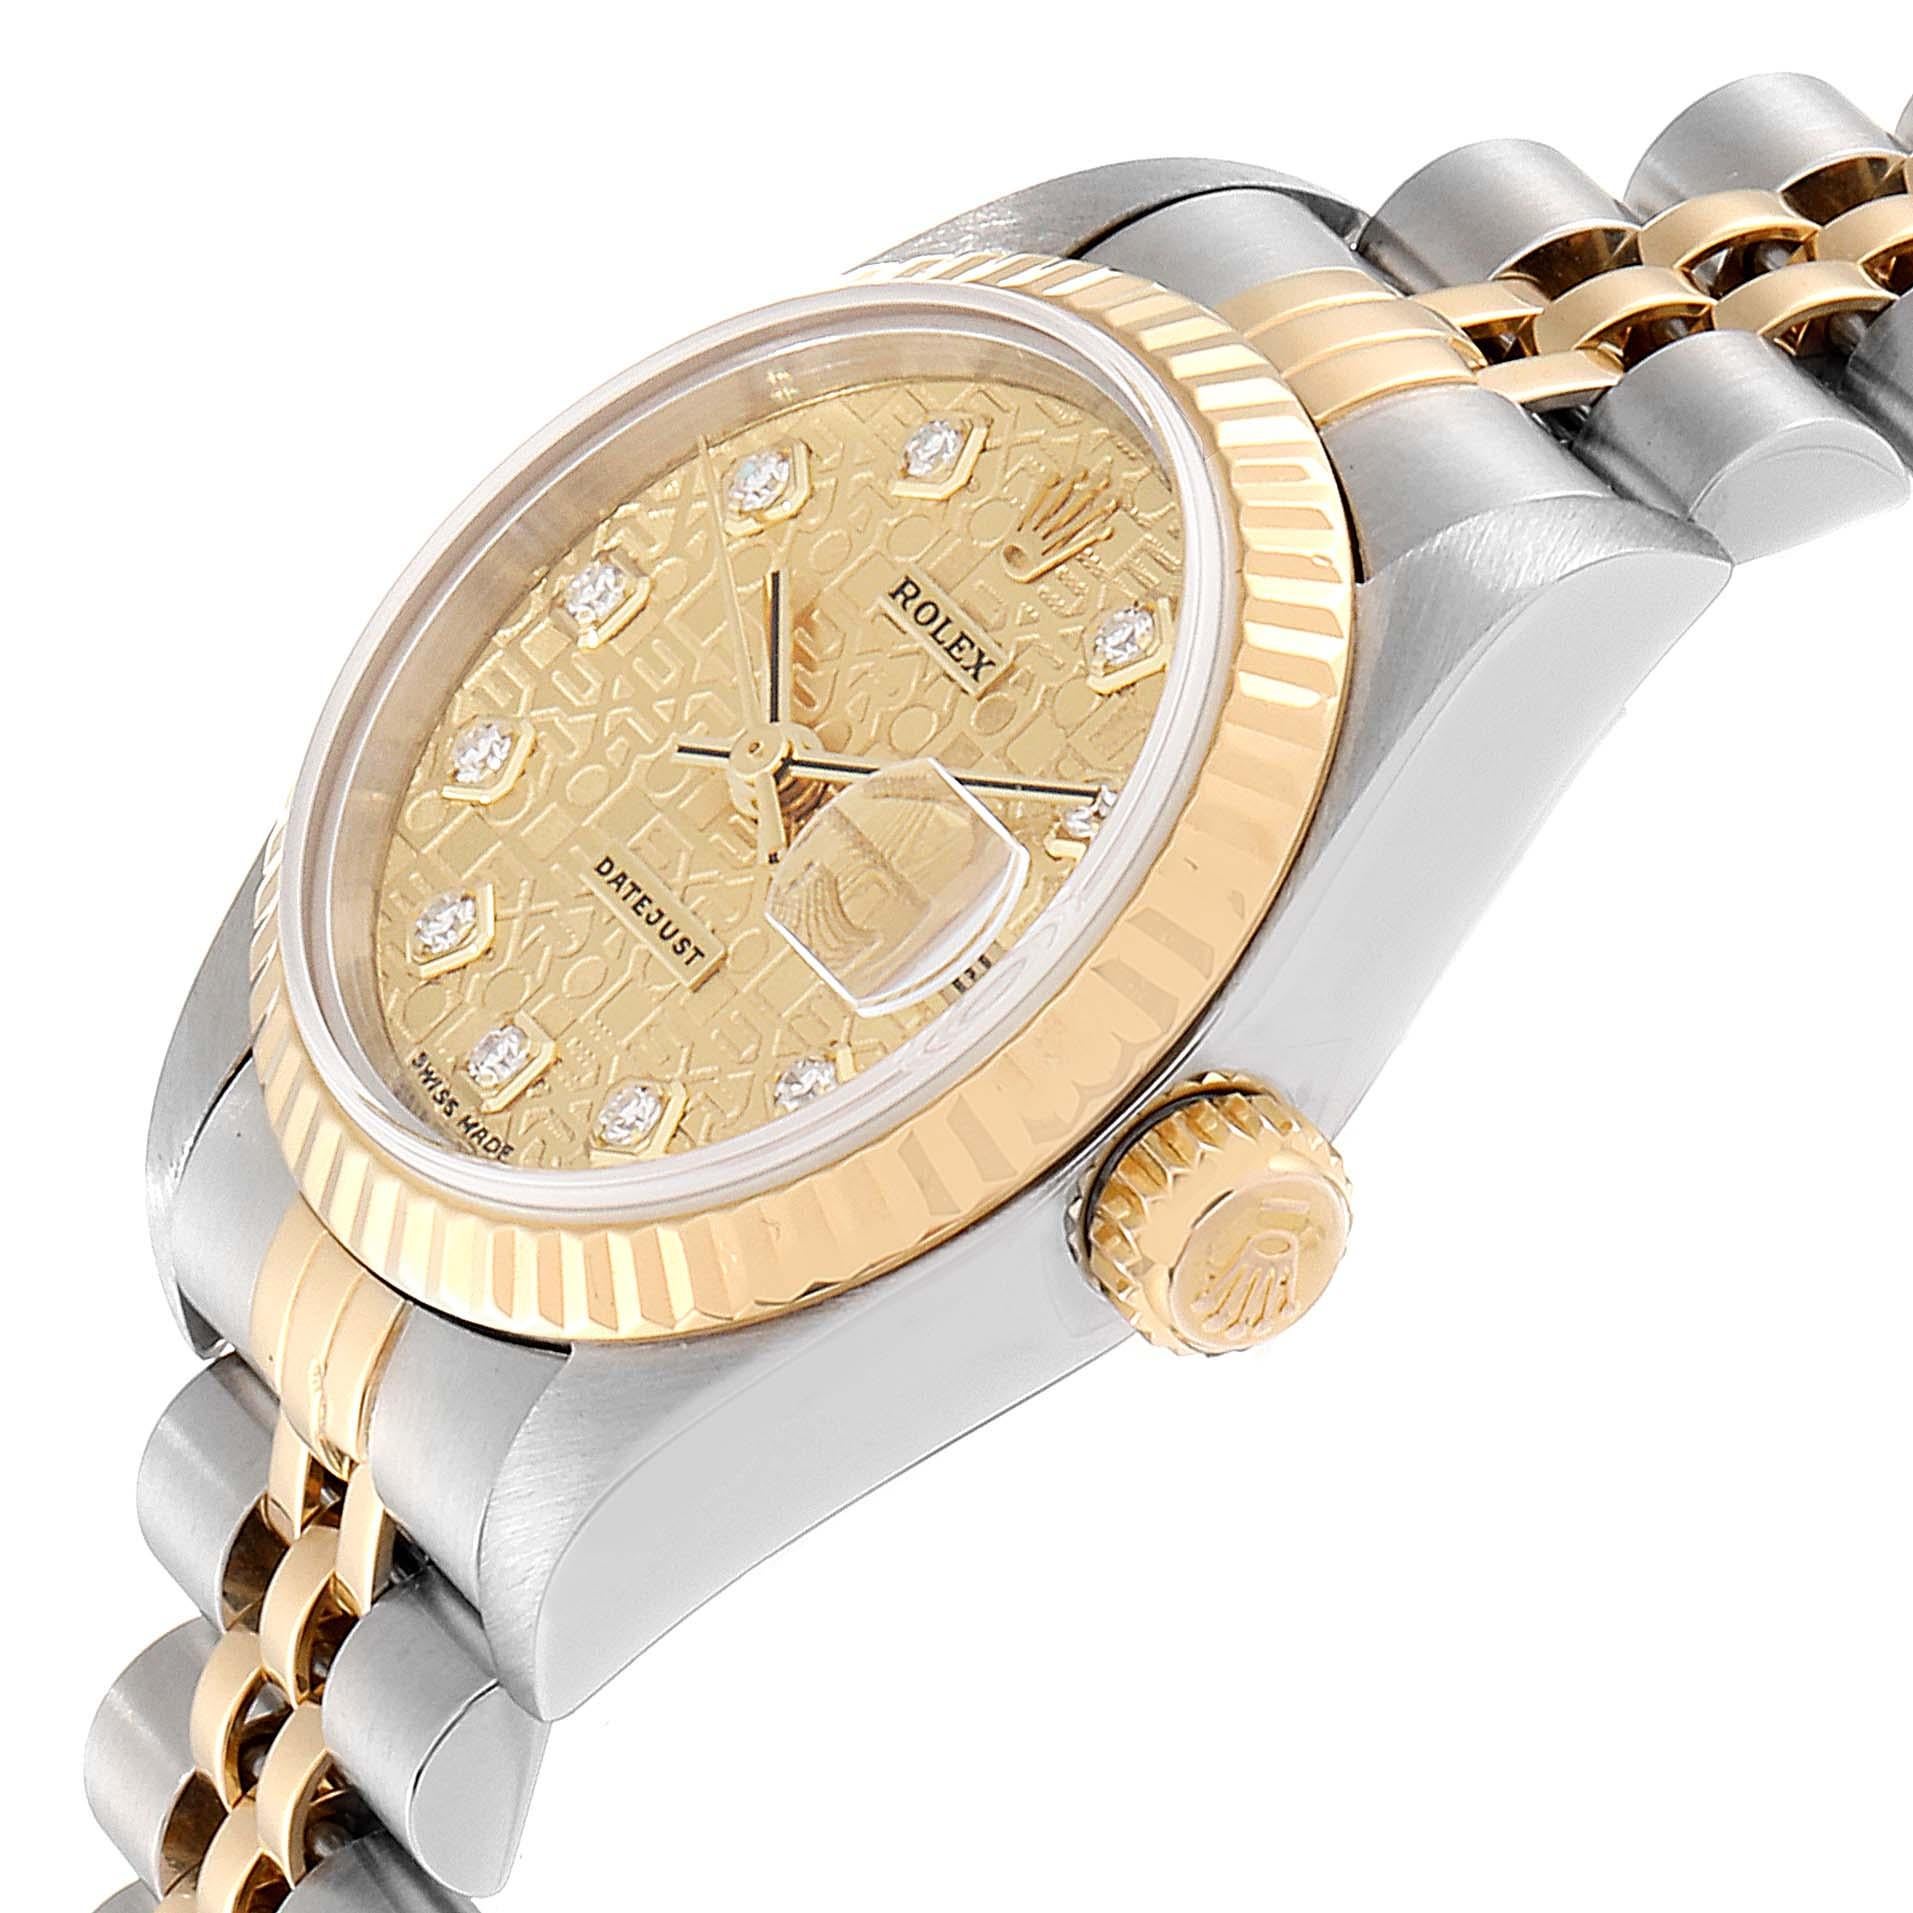 Rolex Datejust Steel Yellow Gold Jubilee Diamond Dial Ladies Watch 79173 In Excellent Condition For Sale In Atlanta, GA